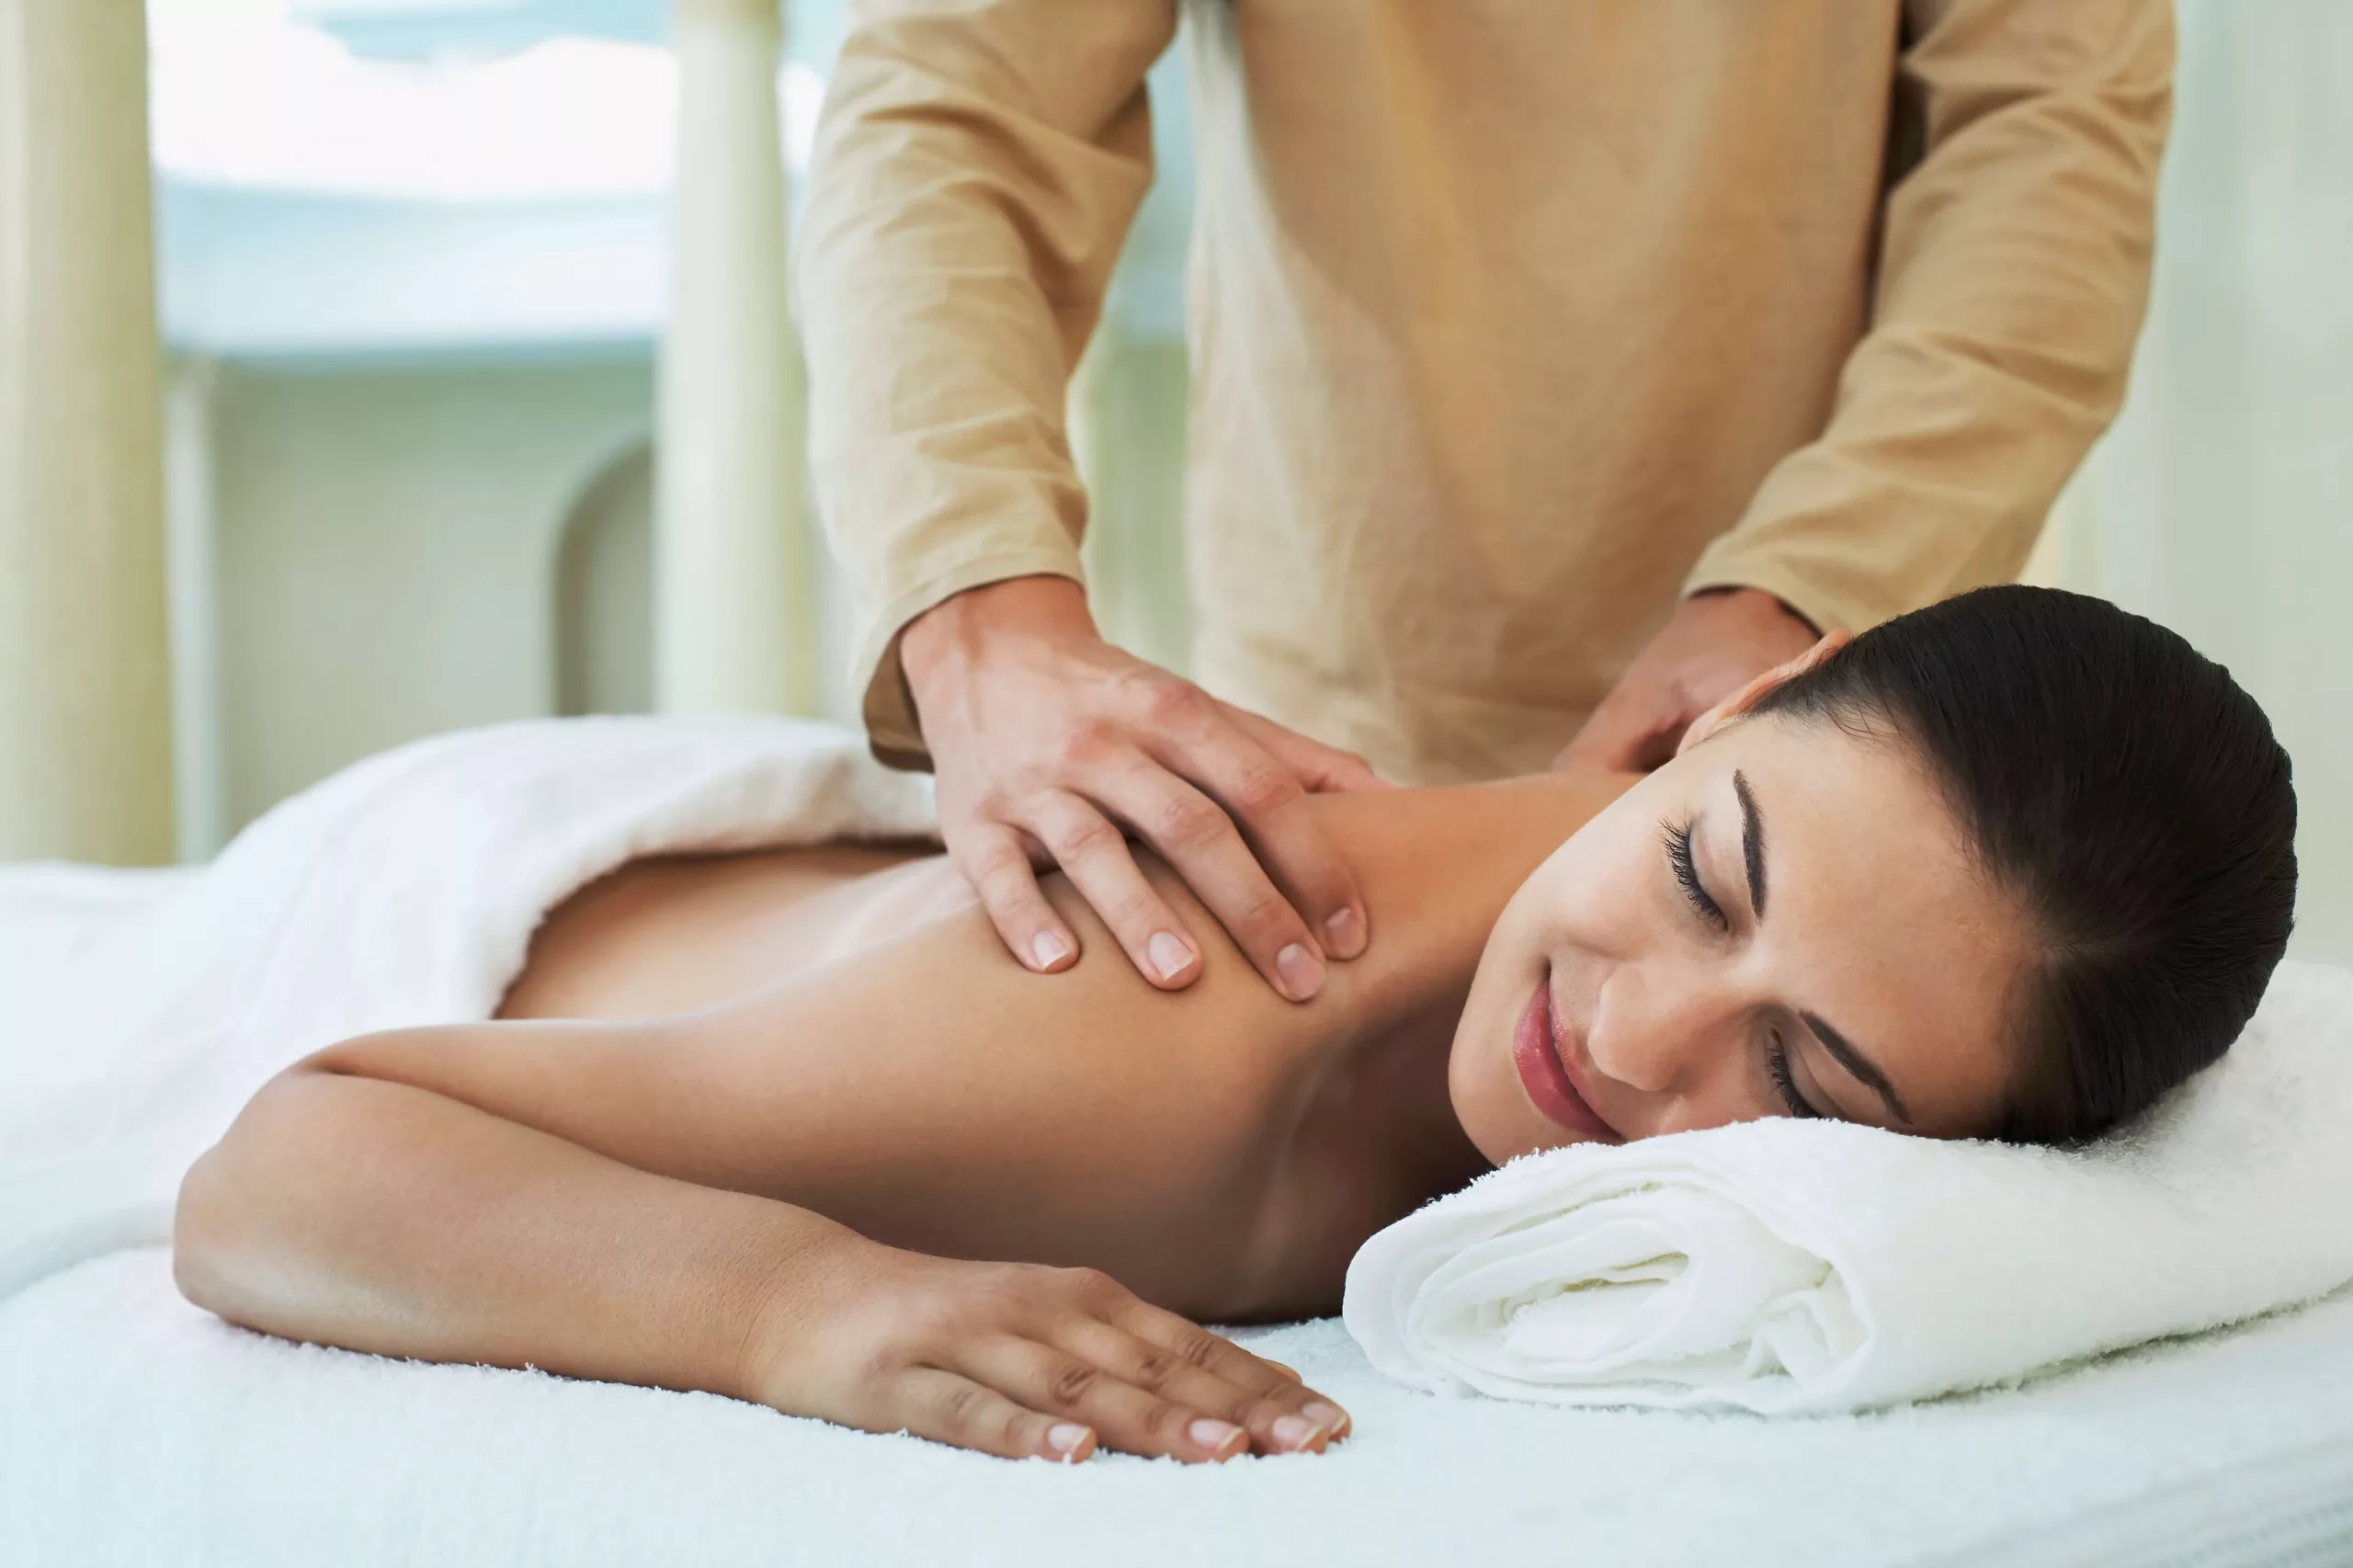 Young woman receiving a massage